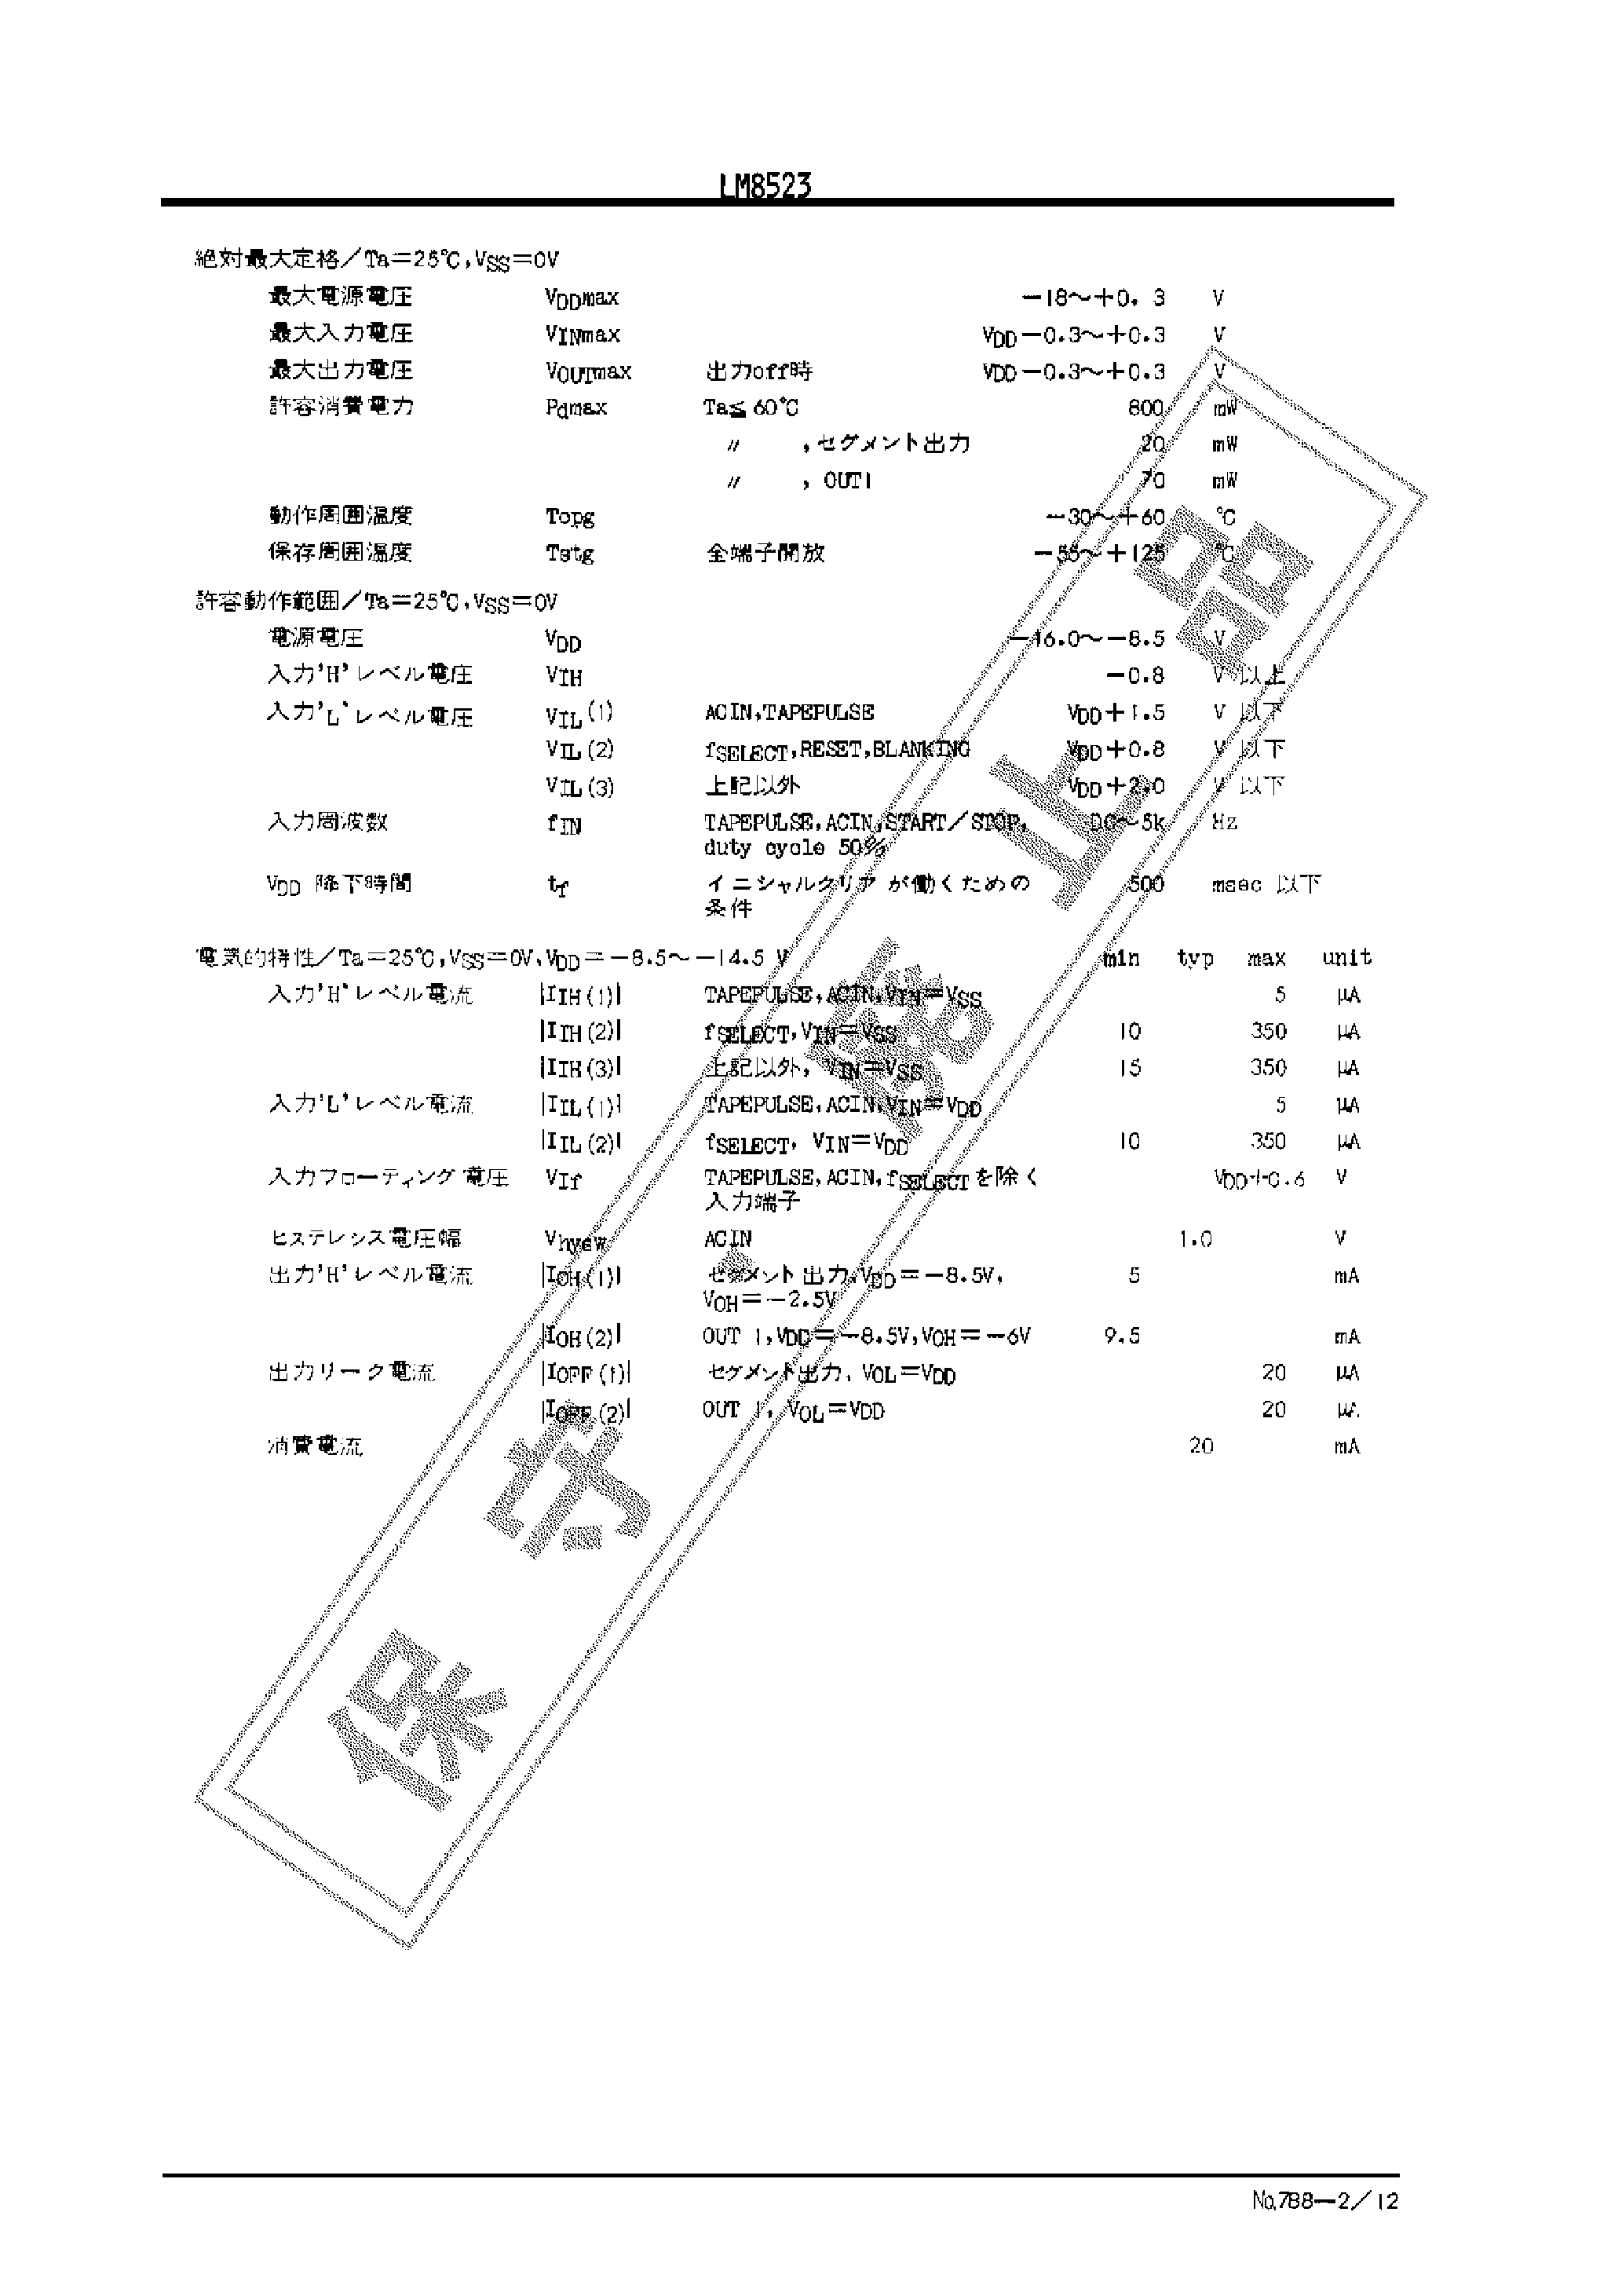 Datasheet LM8523 - P-MOS LSI page 2